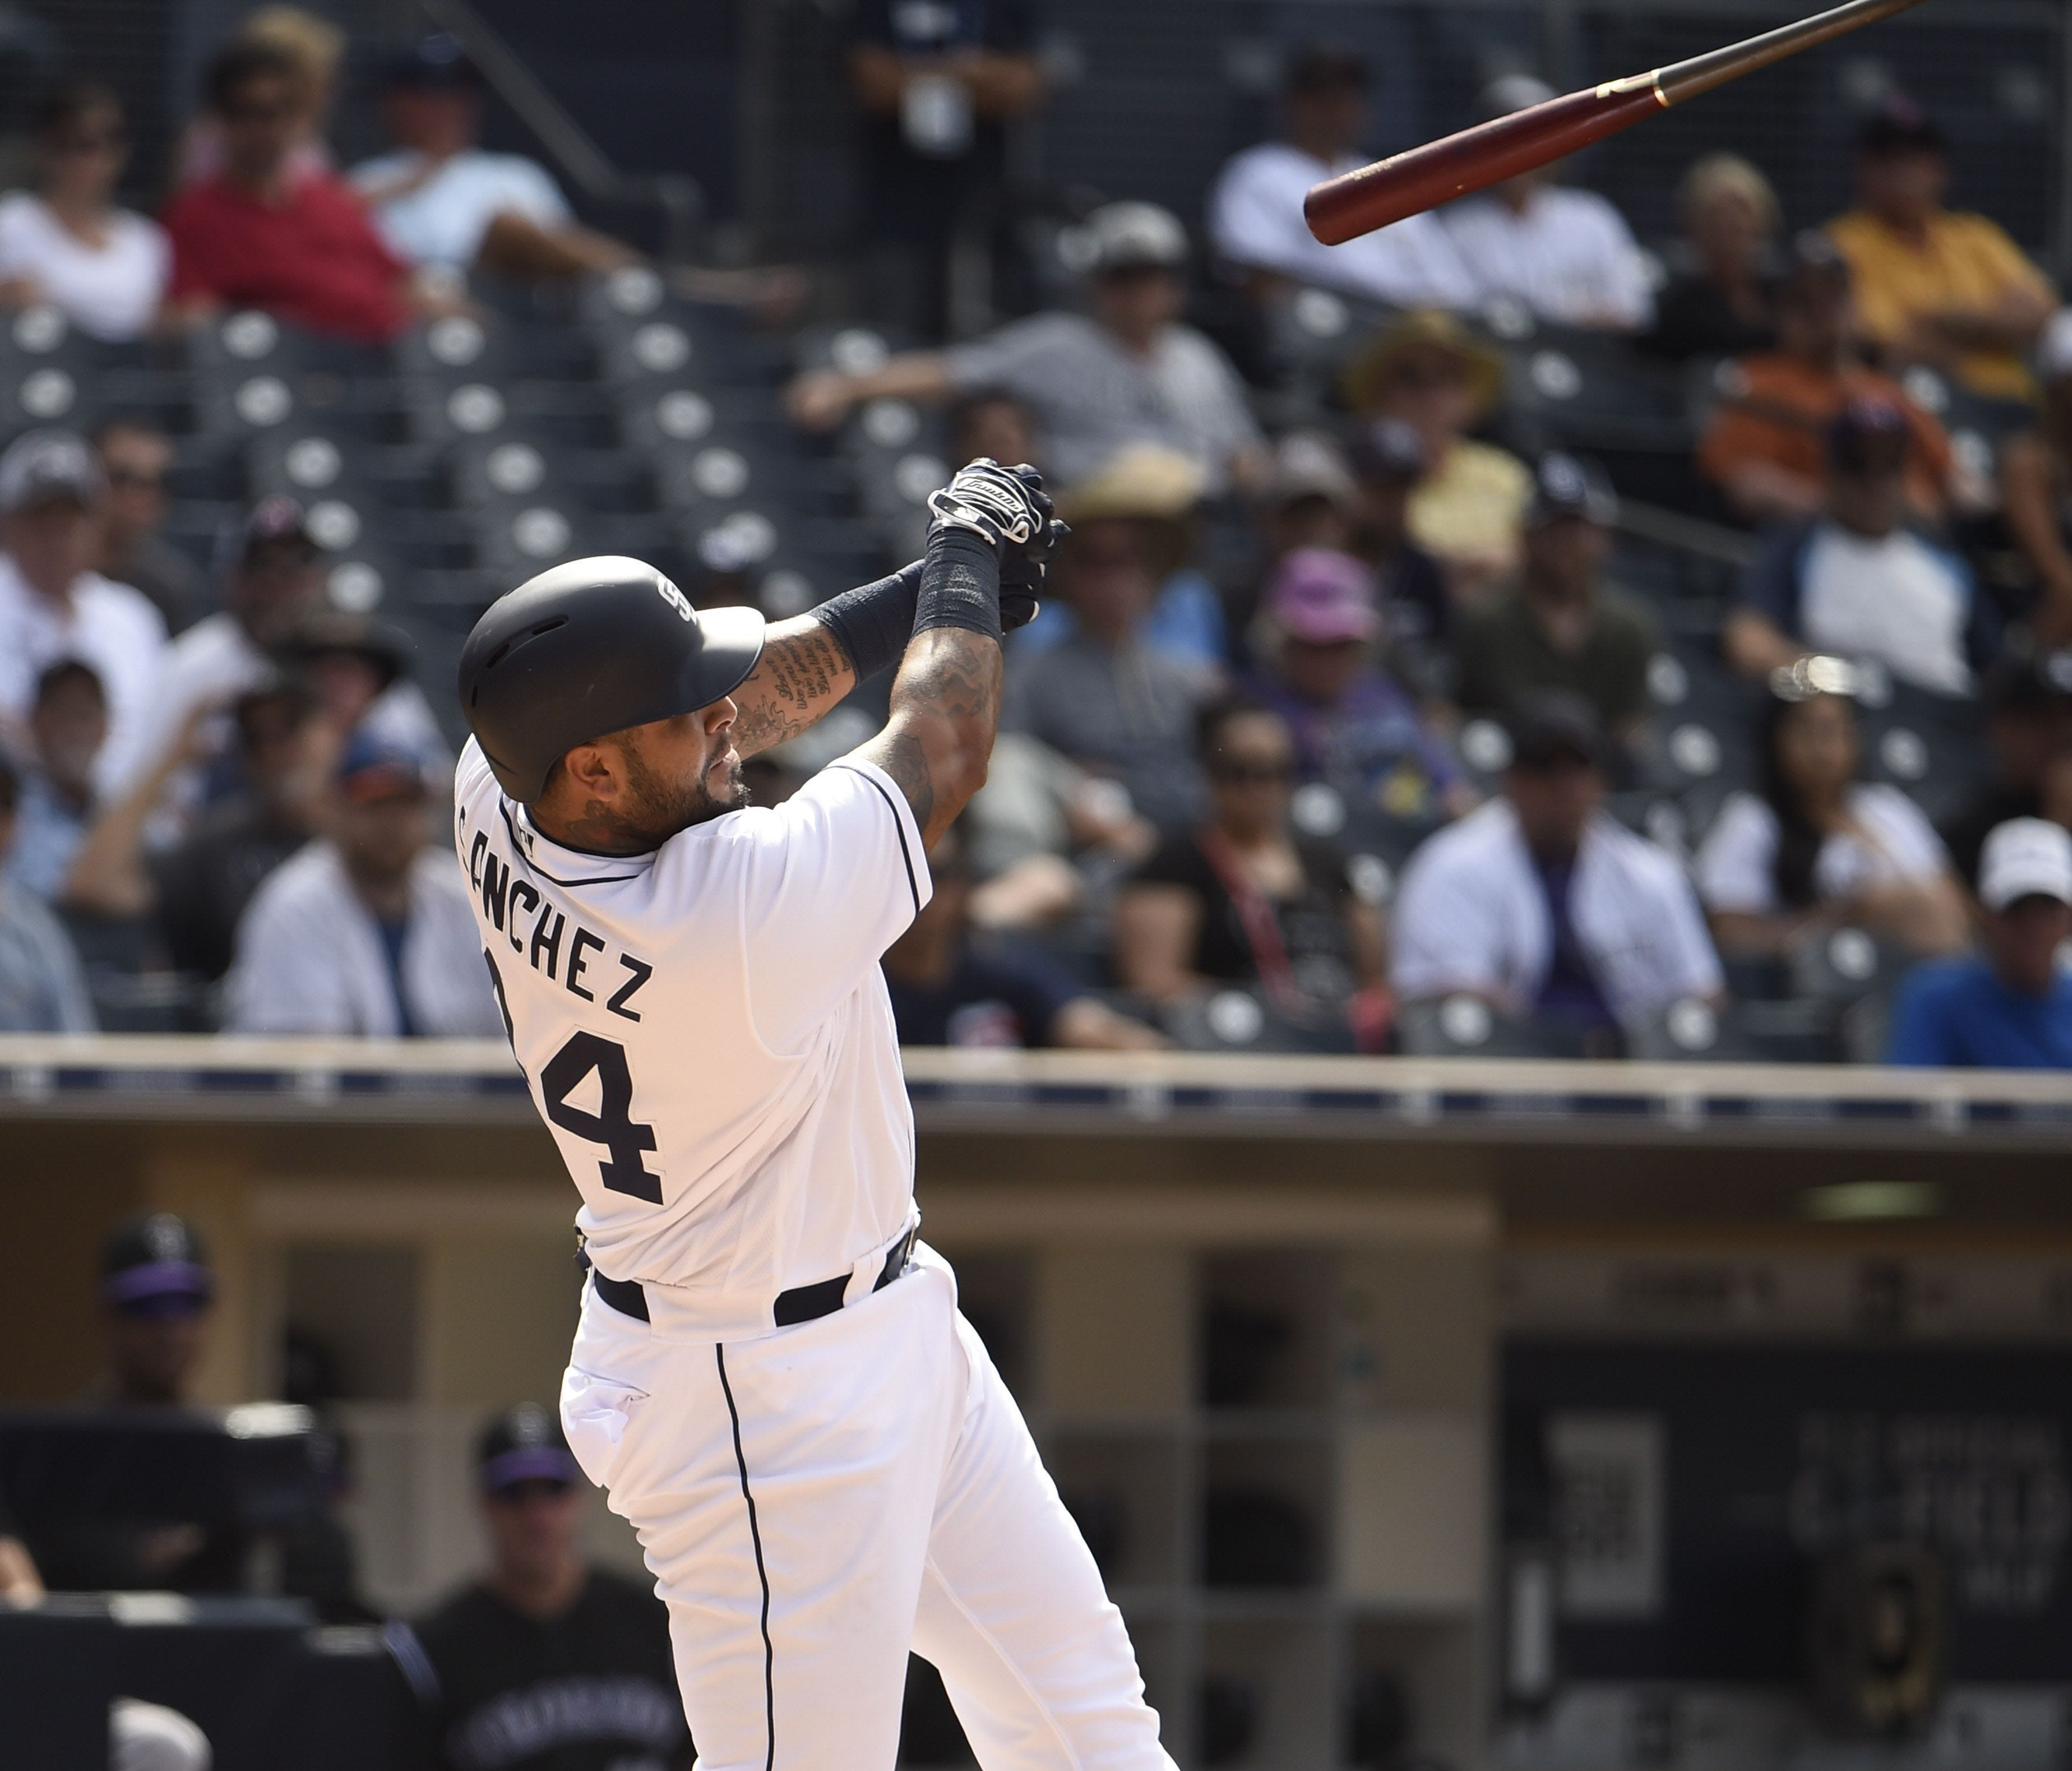 Padres' Hector Sanchez loses his bat that lands in the stands.